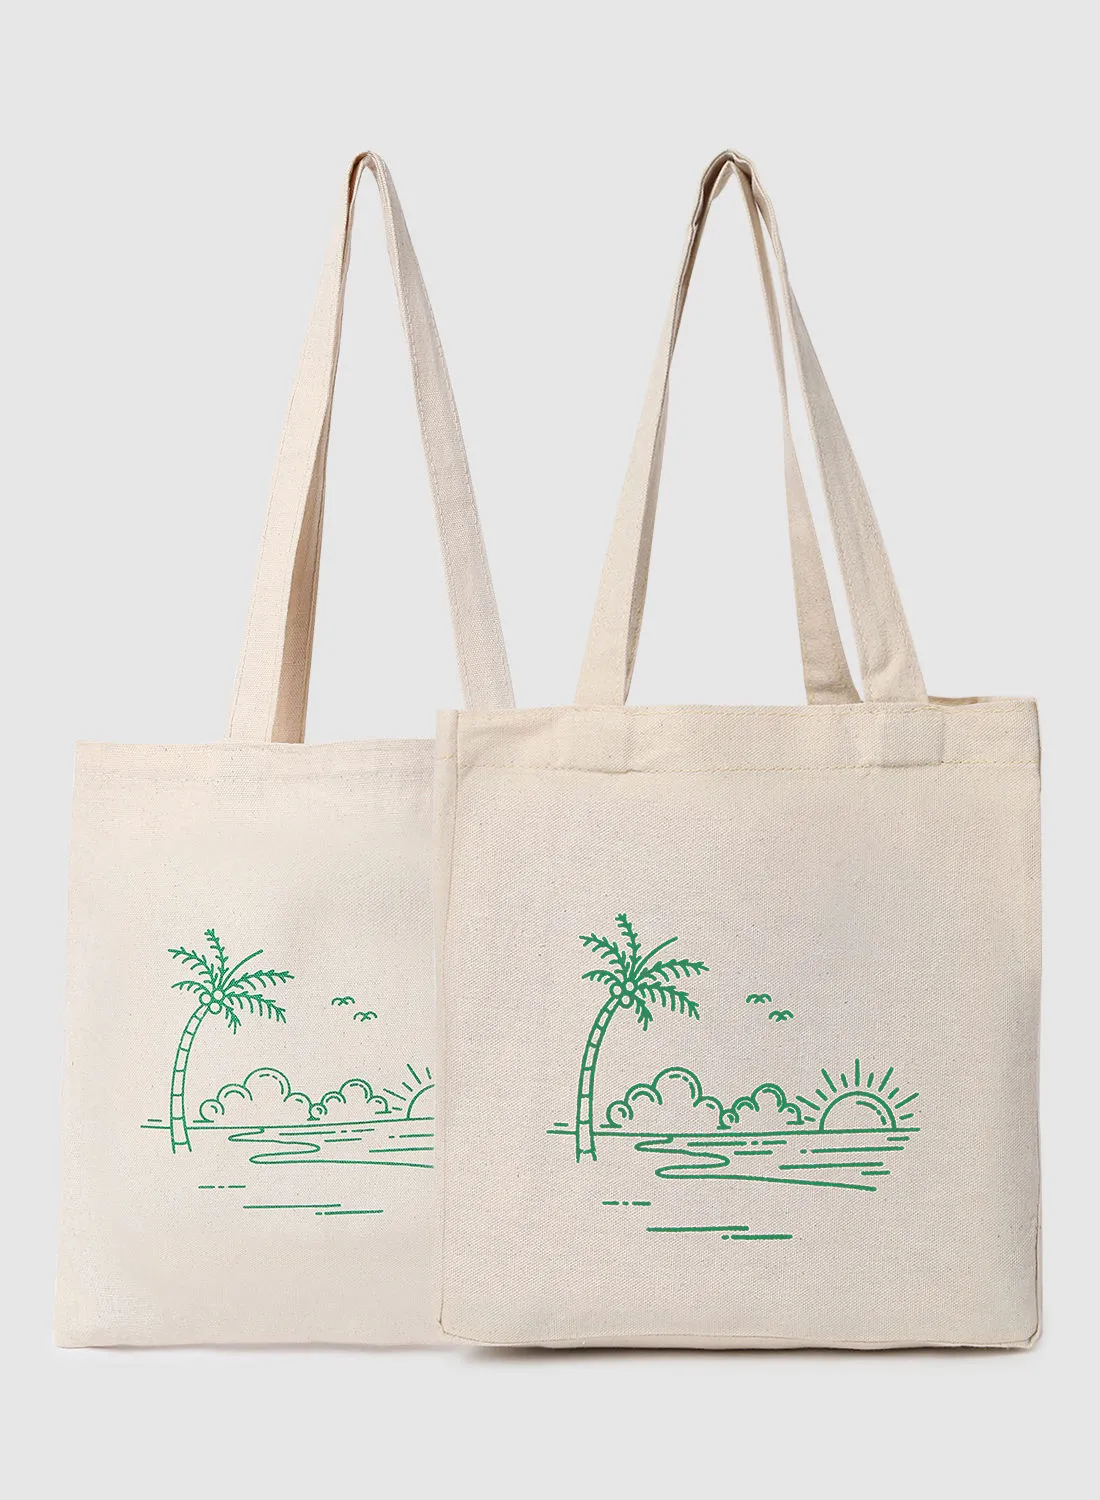 Amal Pack Of 2 Beach Print Canvas Shopping And Grocery Bags Color Shade May Vary Green/Beige